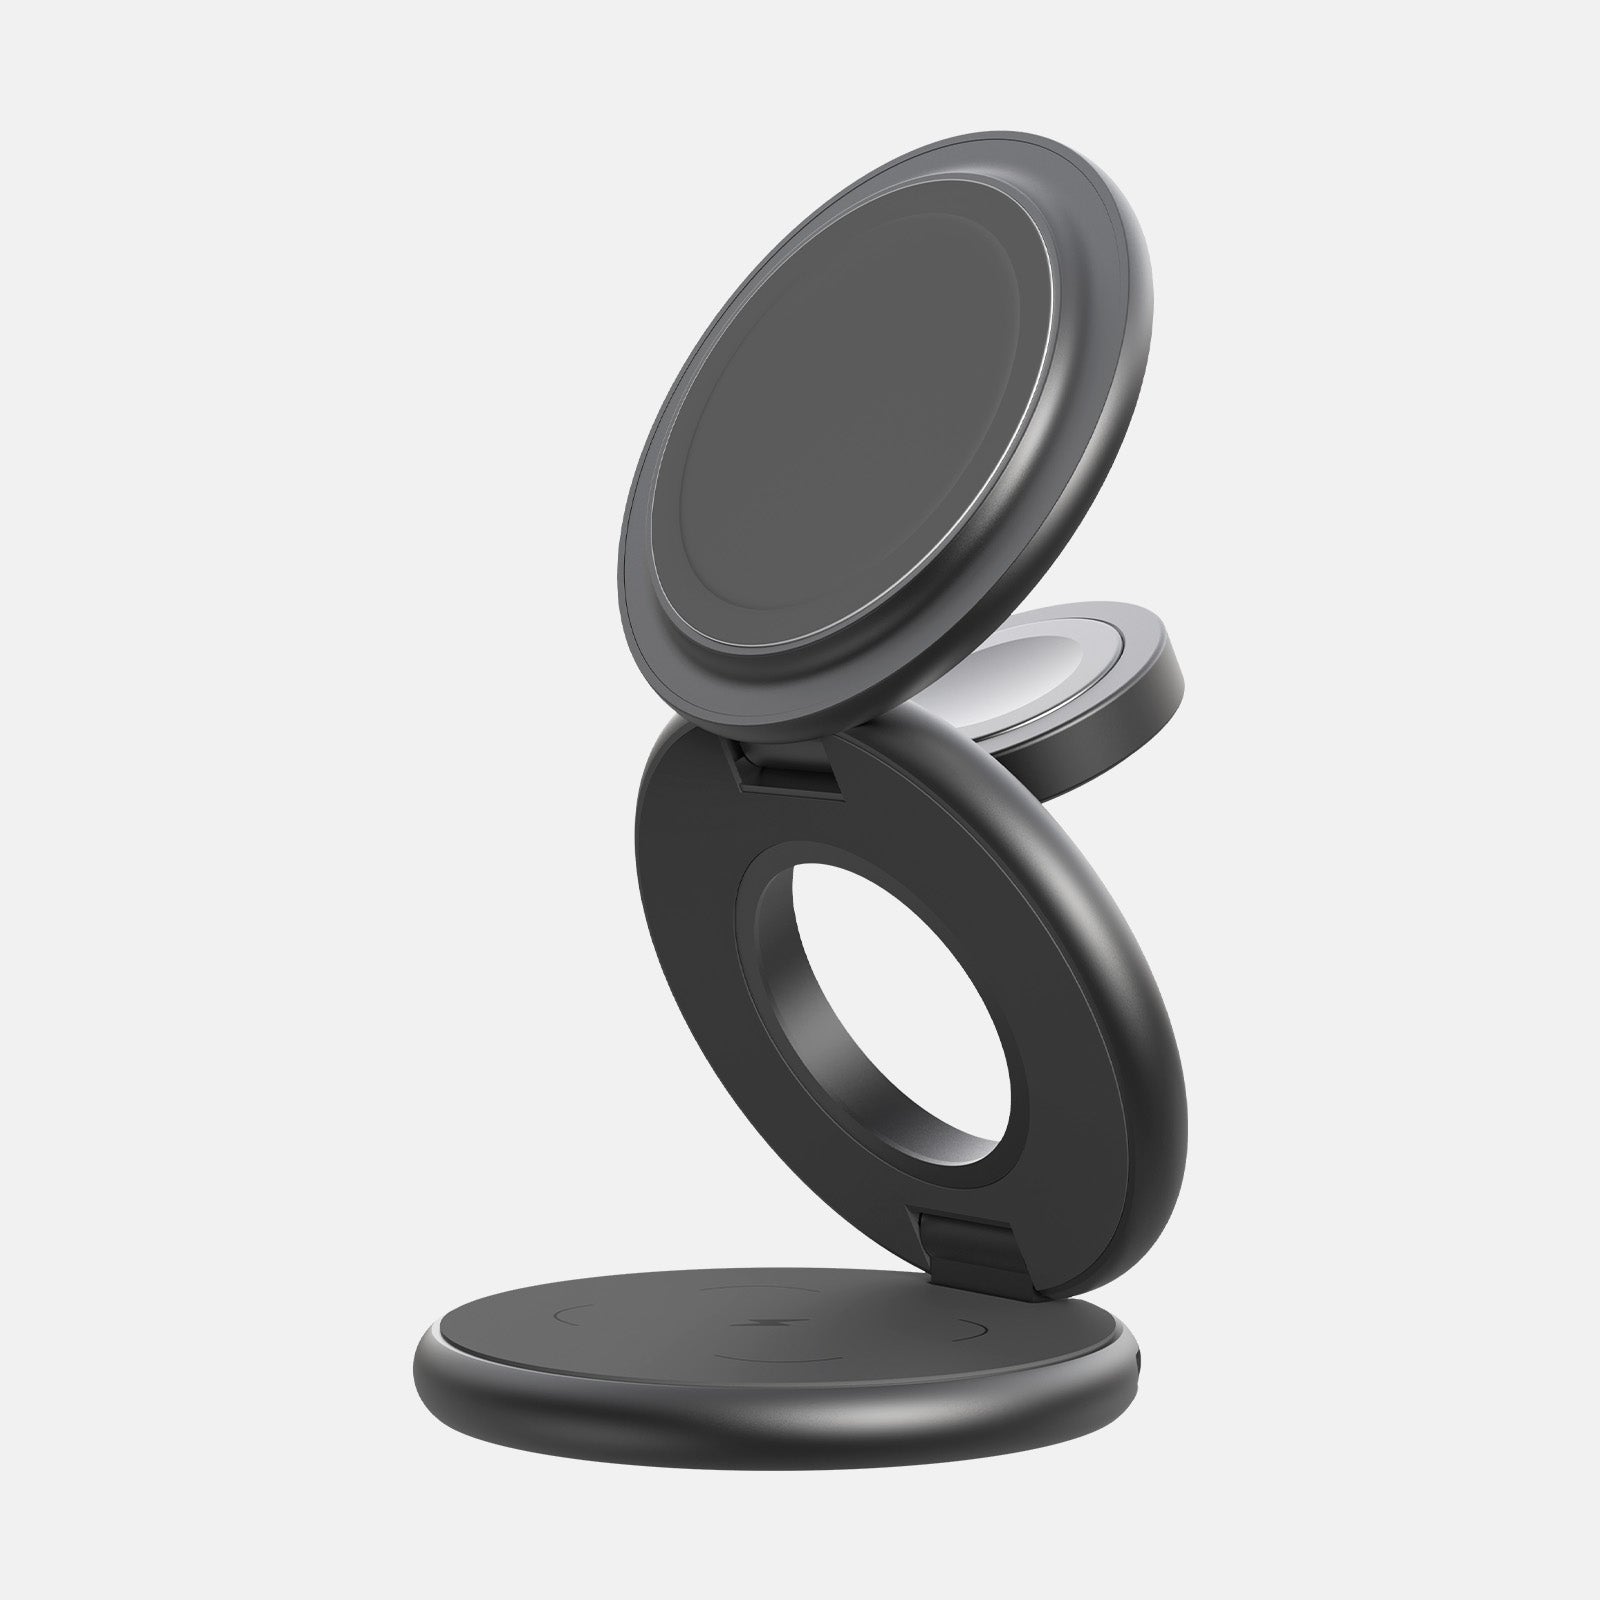 KUXIU X63 3-in-1 foldable magnetic wireless charger & stand Kit